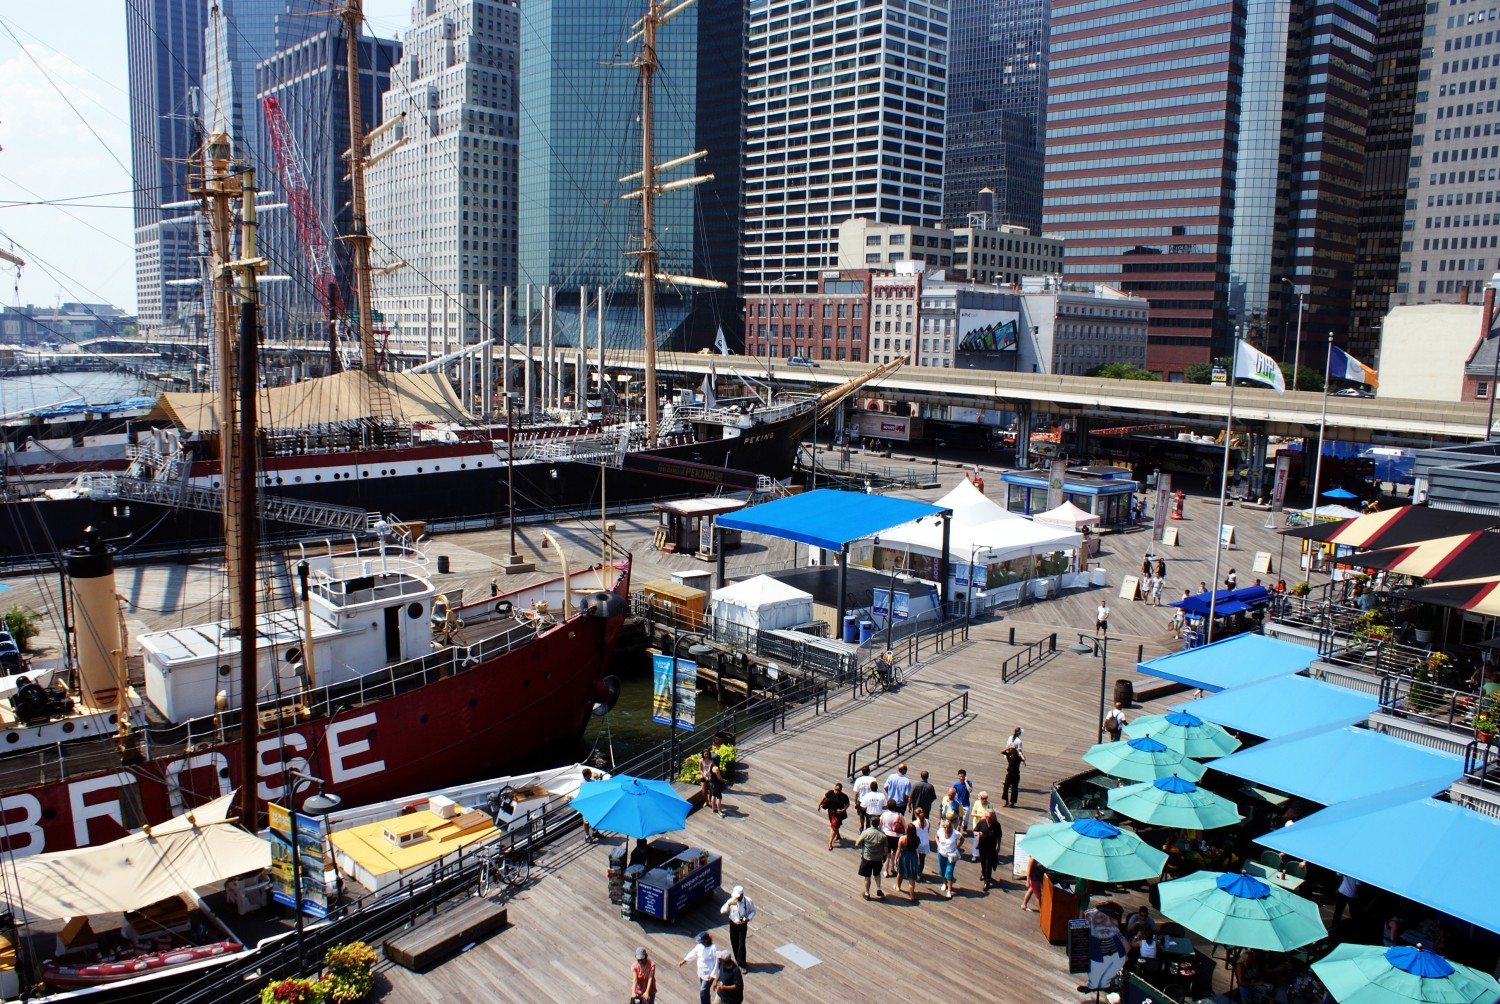 The South Street Seaport Museum Announces An Expansion of the Mini Mates Program